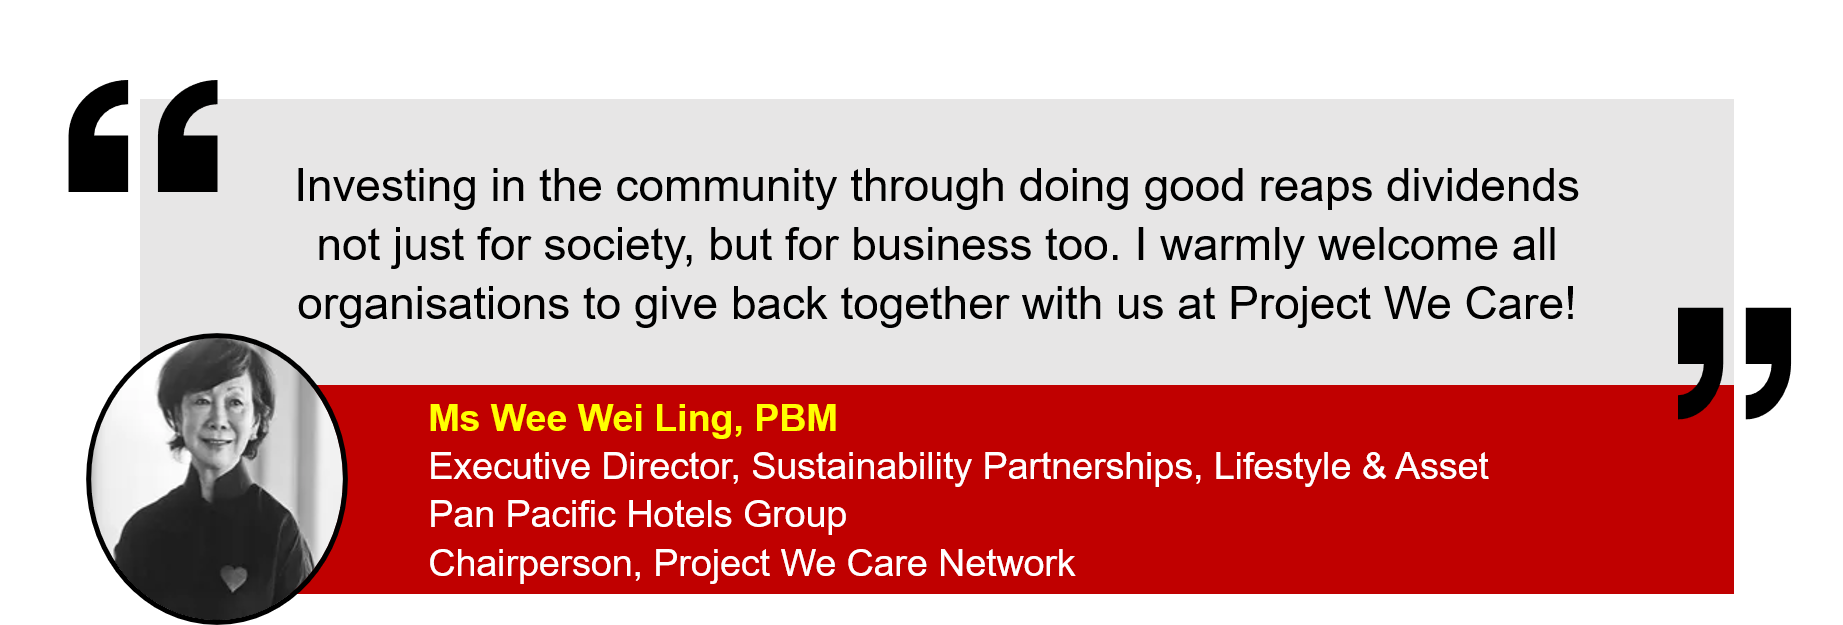 Quote From People's Association CSR Partner